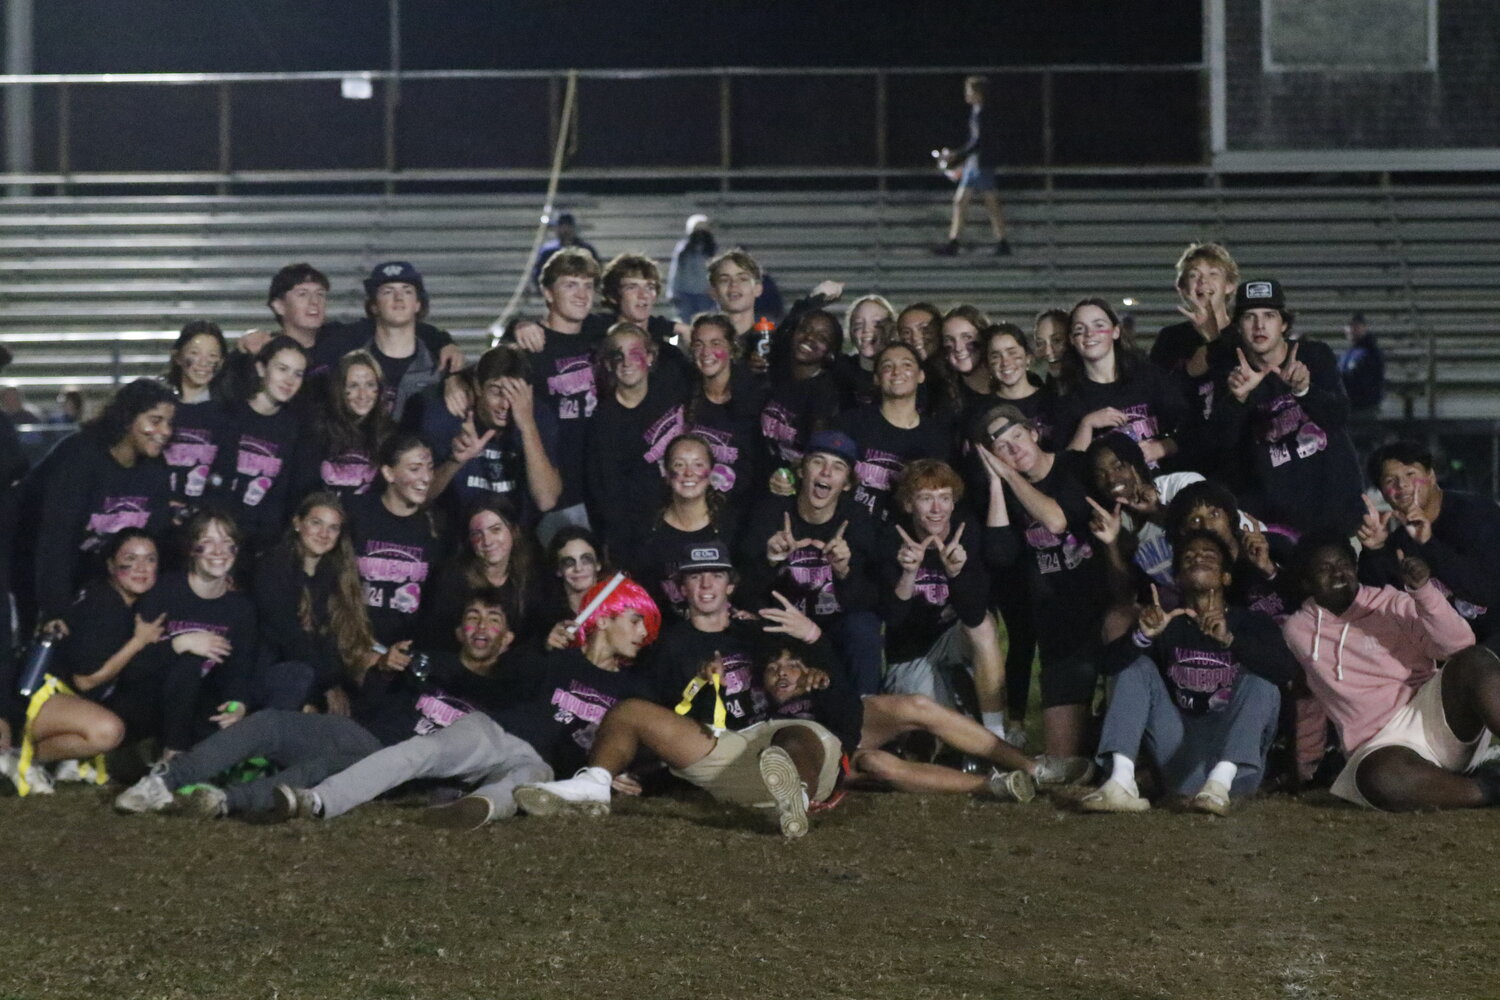 The seniors beat the juniors in Thursday's Powder Puff flag football game, marking the beginning of Homecoming Weekend.